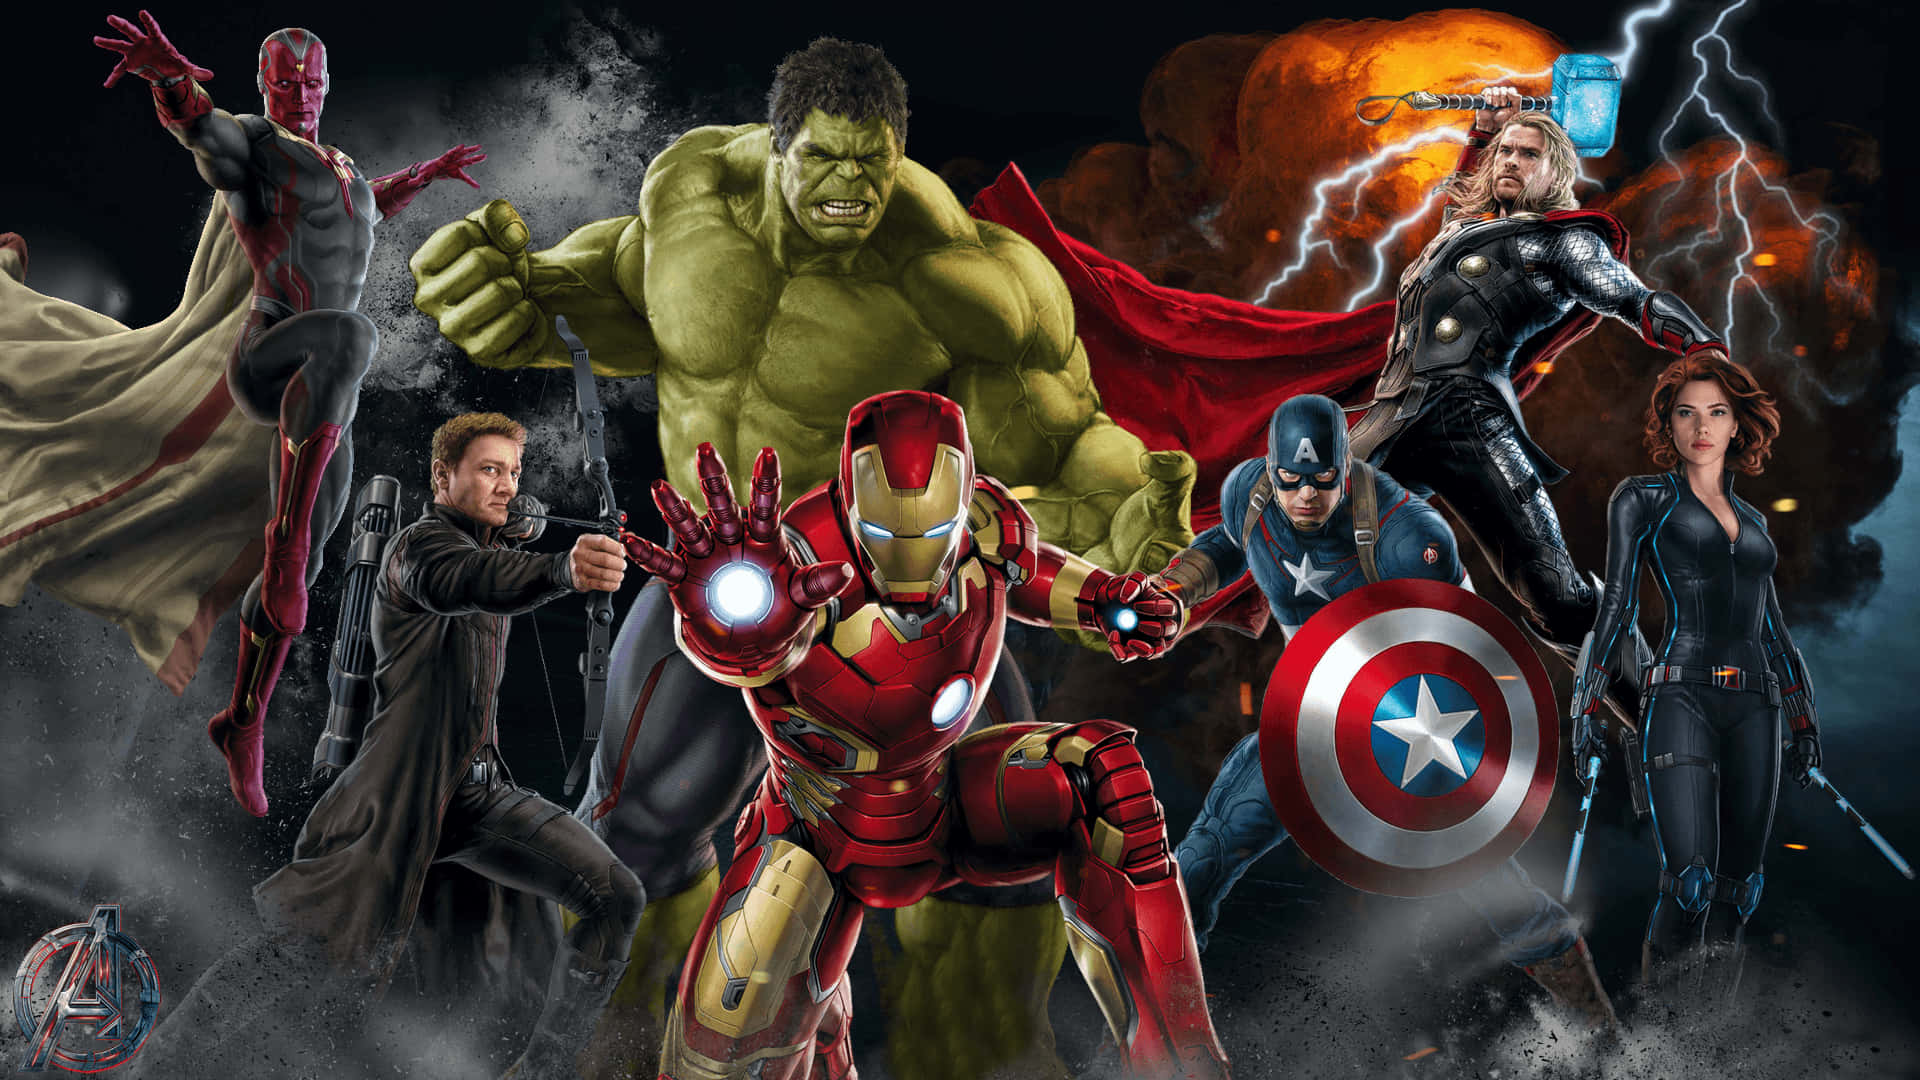 Iron Man safeguards the world as part of The Avengers Wallpaper